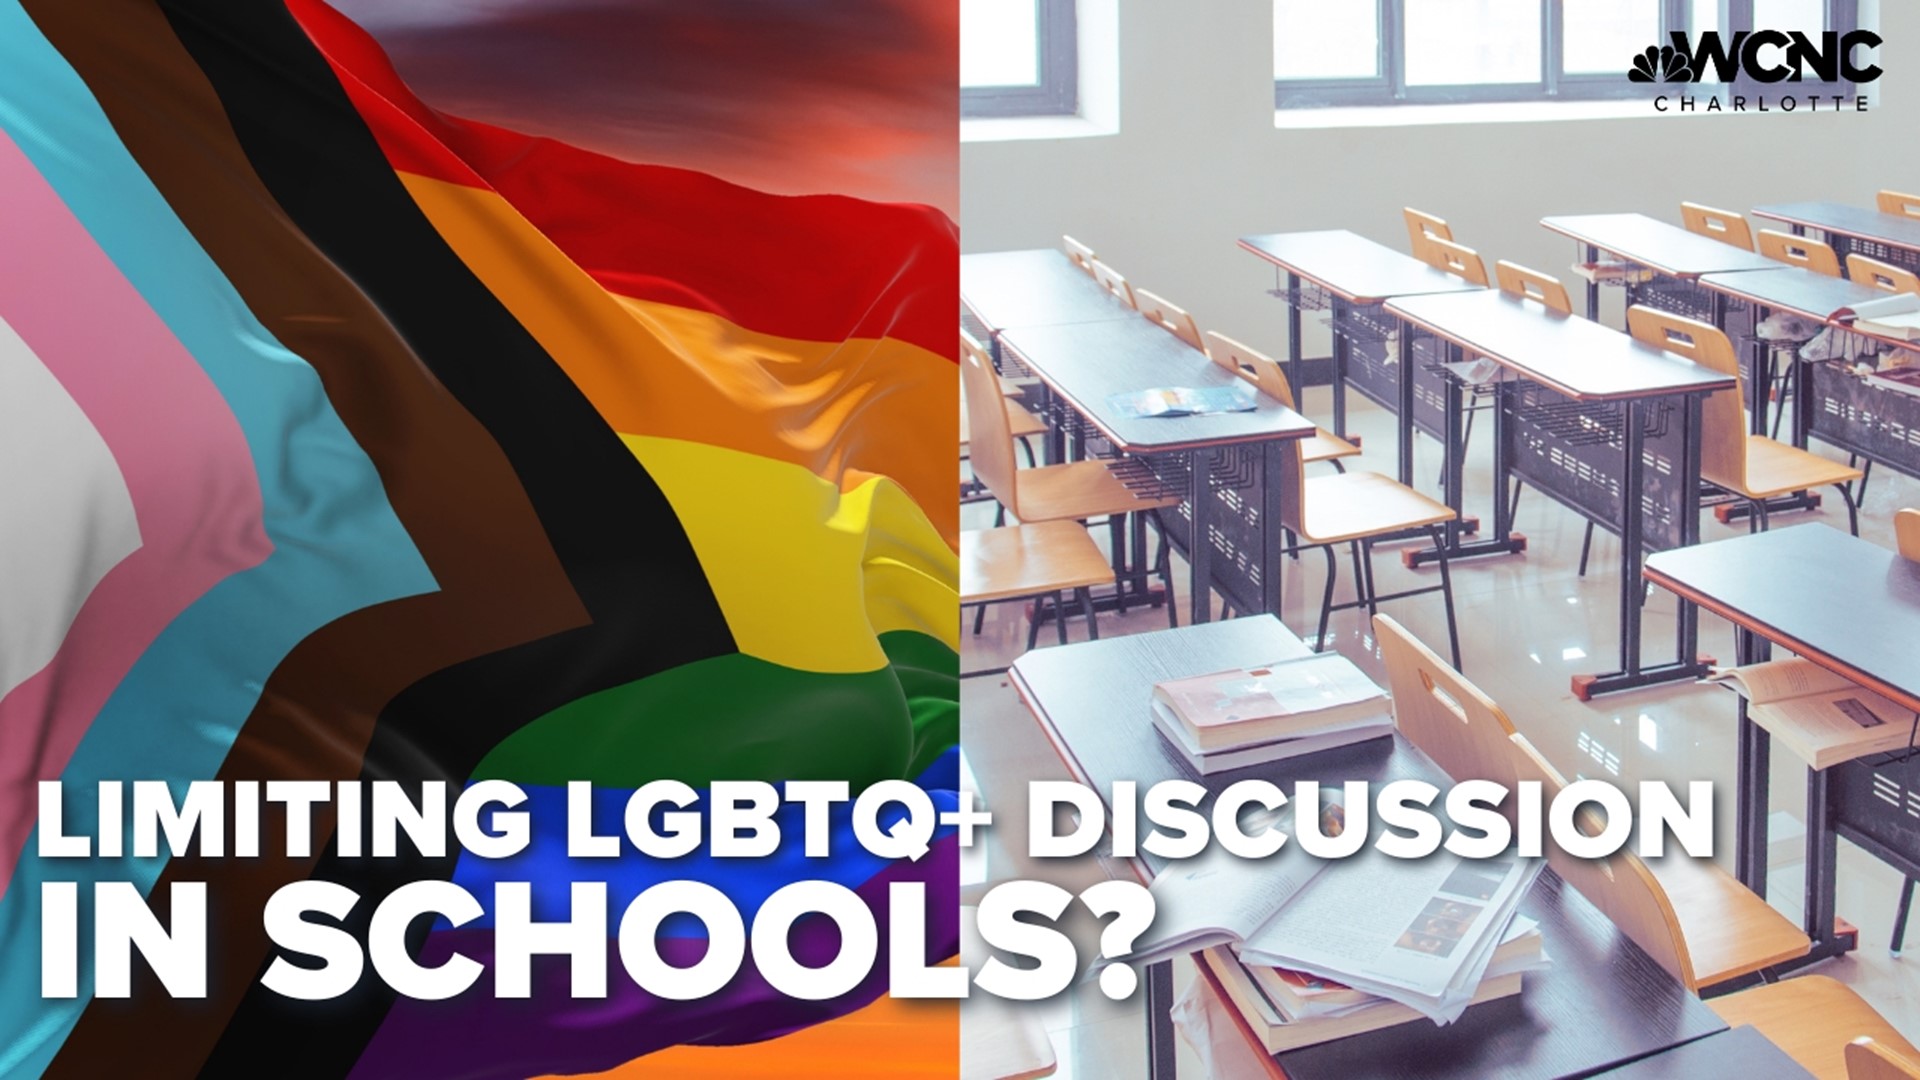 The bill aims to limit the discussion of gender and sexuality in elementary schools.